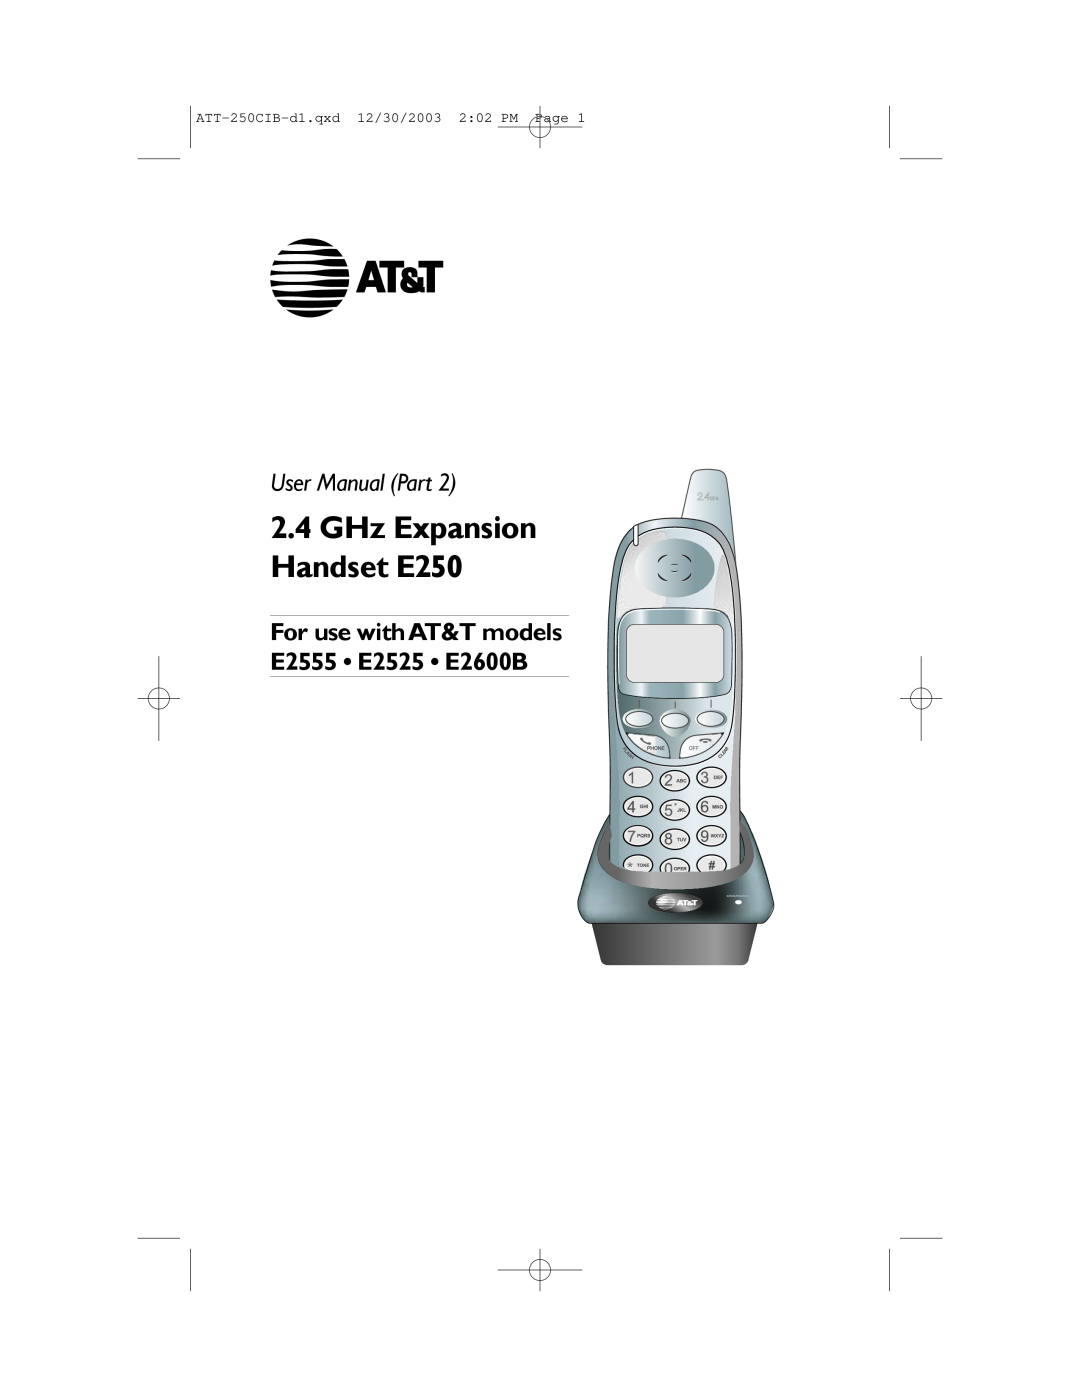 AT&T user manual GHz Expansion Handset E250, For use with AT&T models E2555 E2525 E2600B 